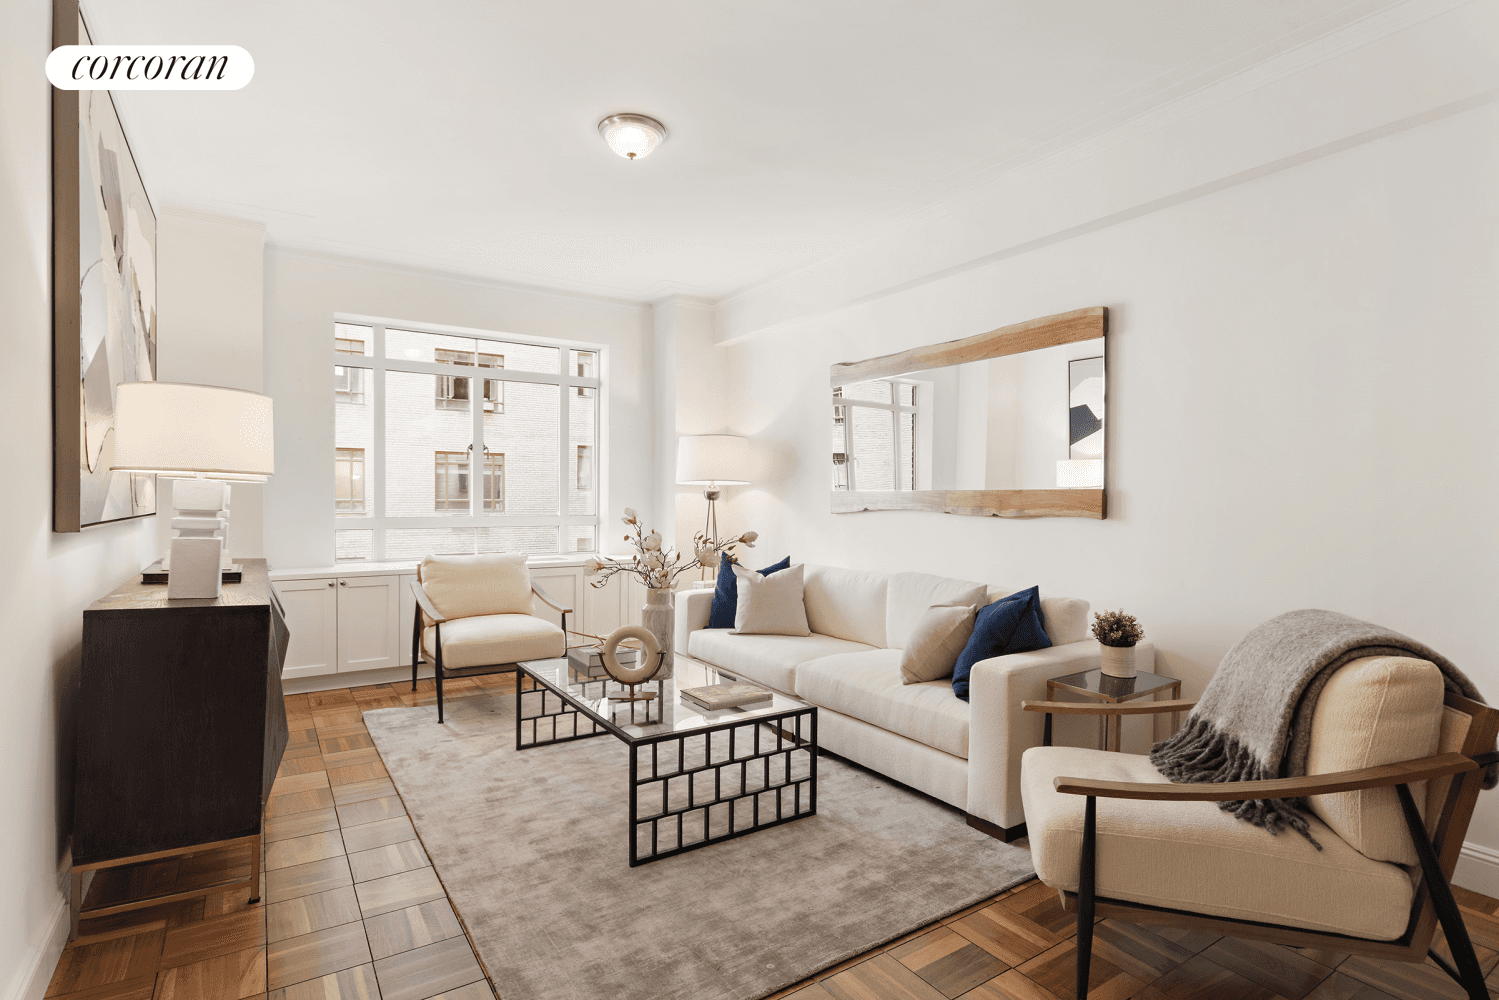 Located at The Century Condominium on Central Park West between 62nd and 63rd streets, this spacious unique prewar corner one bedroom has been completely renovated with new kitchen, bath, through ...